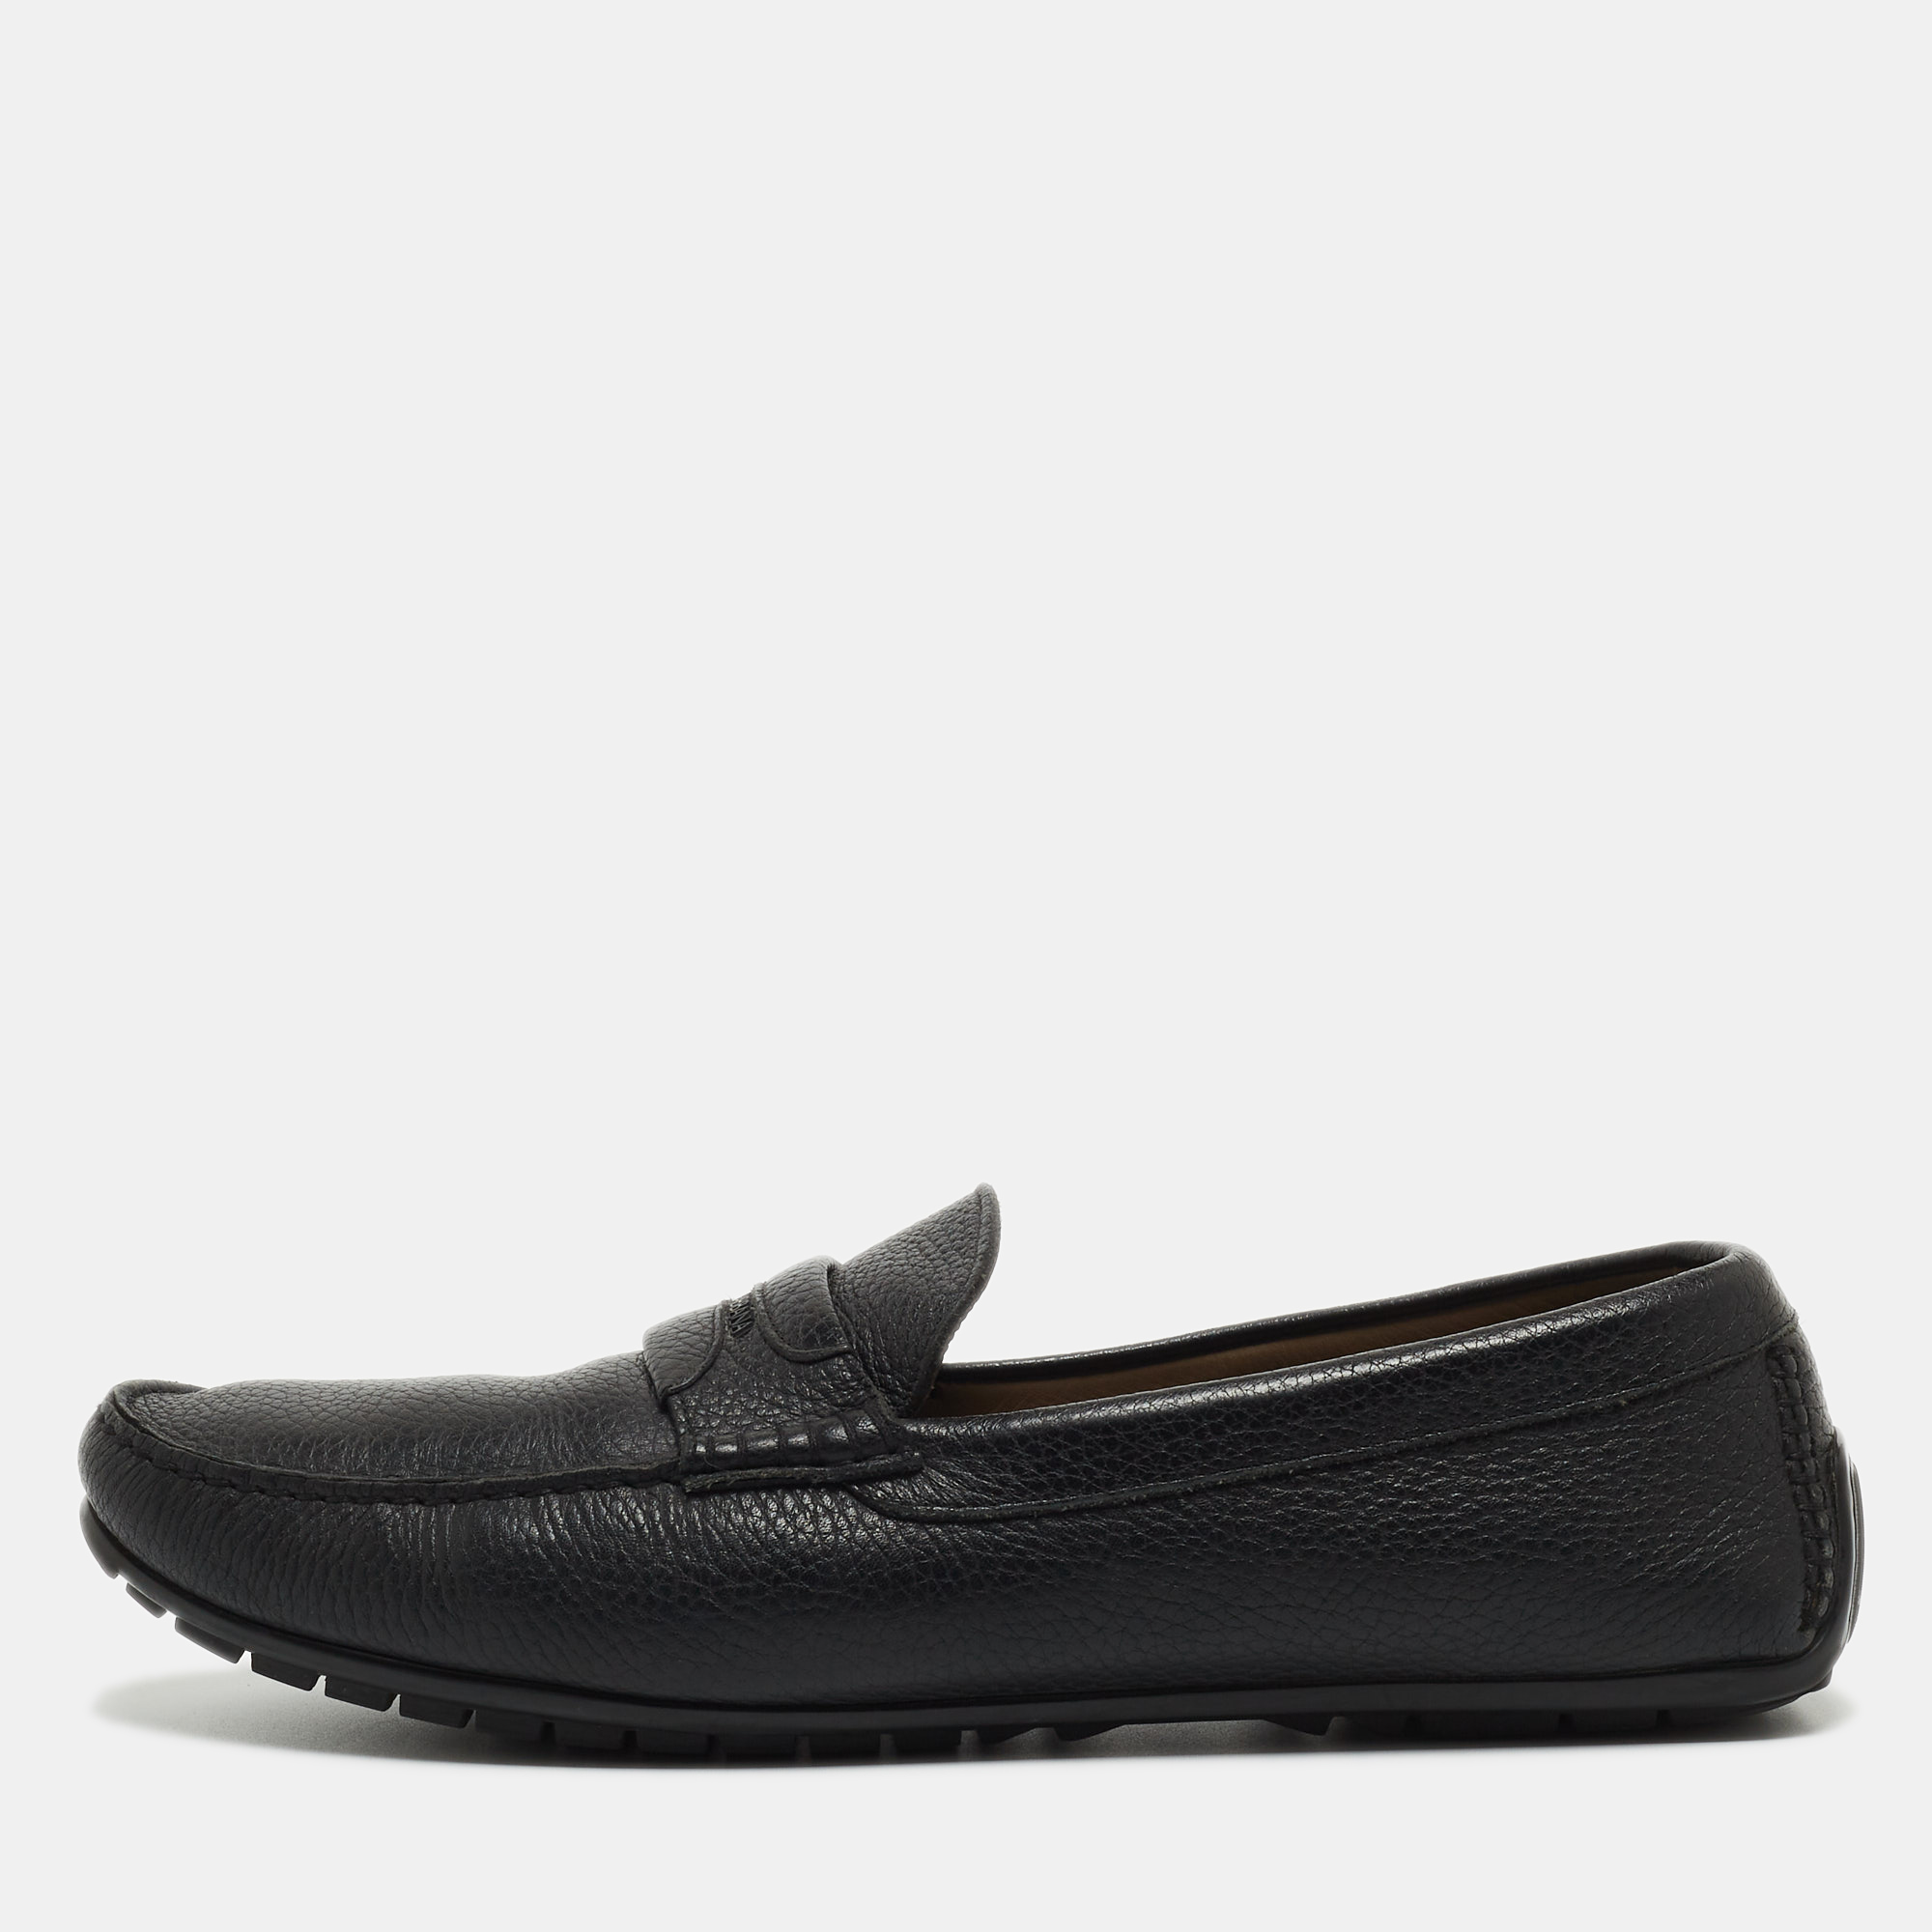 Pre-owned Dolce & Gabbana Black Leather Slip On Loafers Size 44